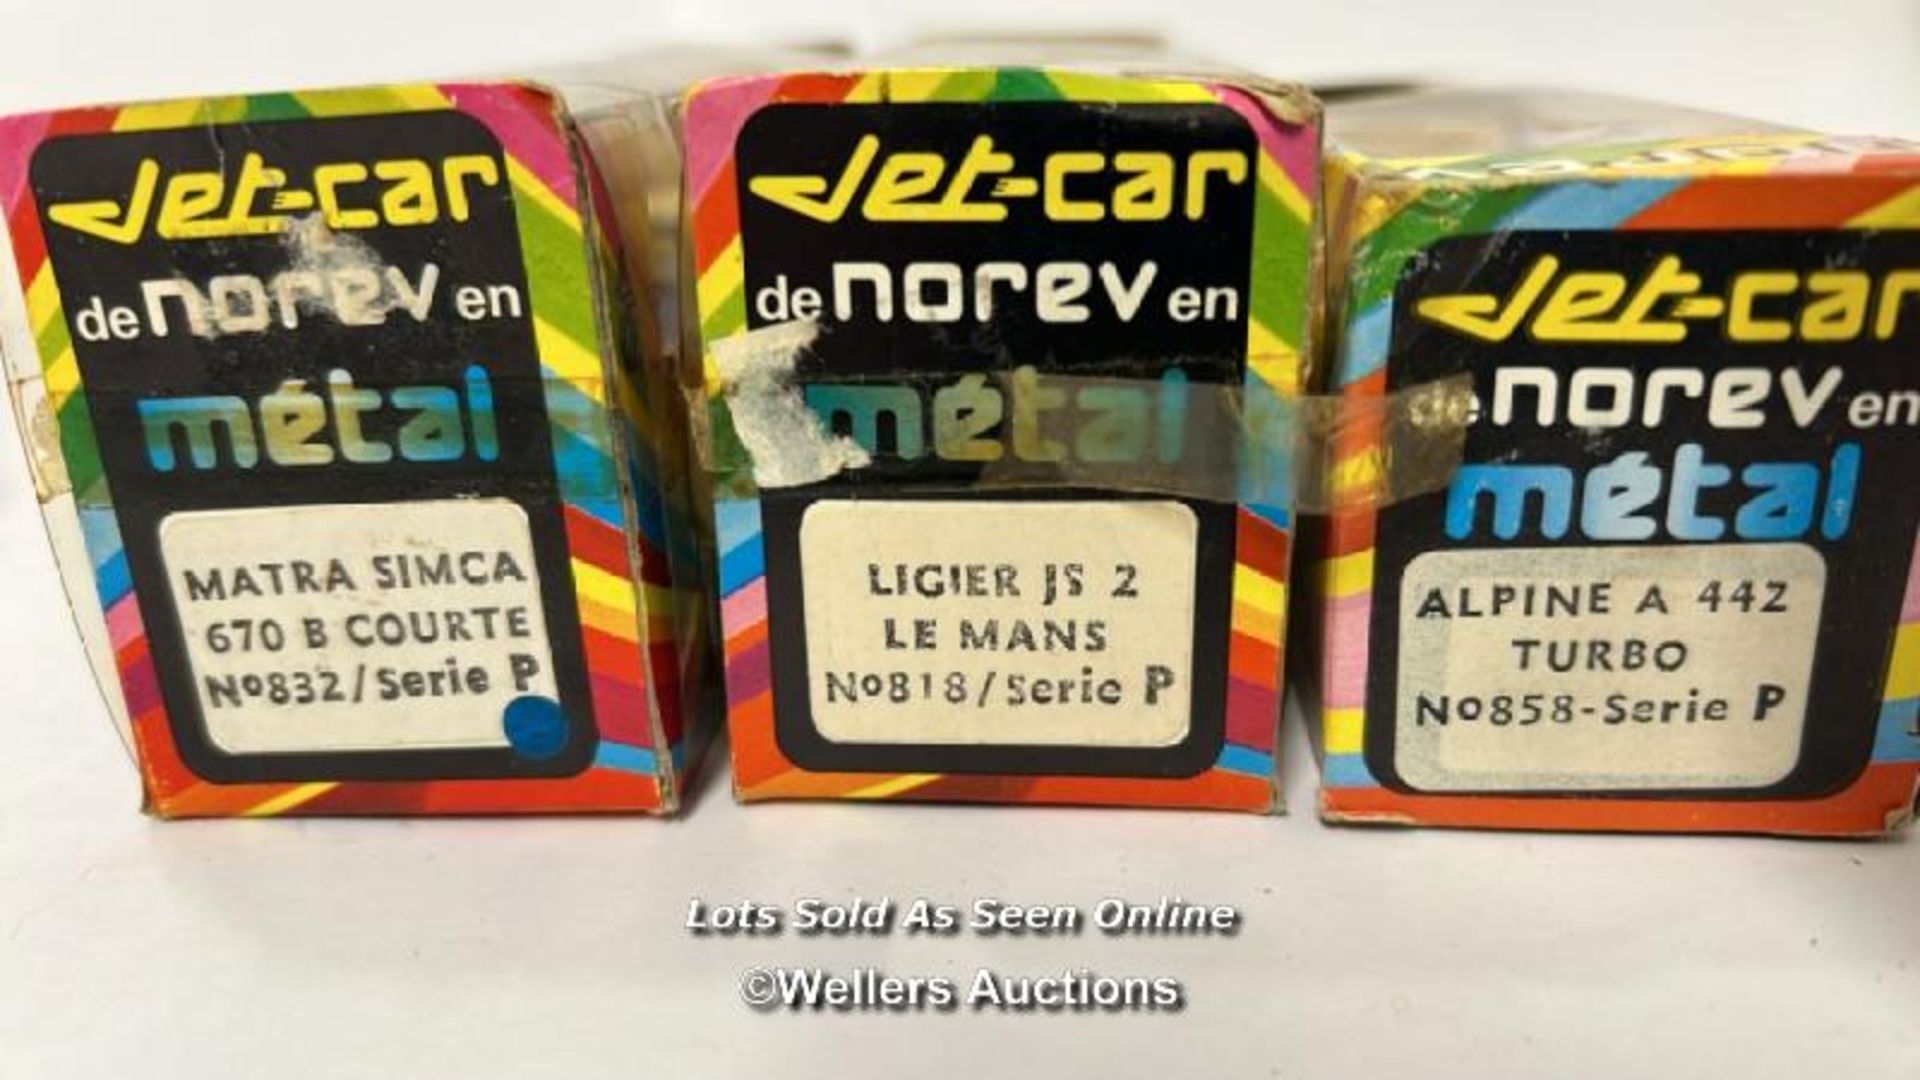 Norev (France) Jet-car group including Alpine A 442 Turbo, boxed (6) / AN14 - Image 9 of 9